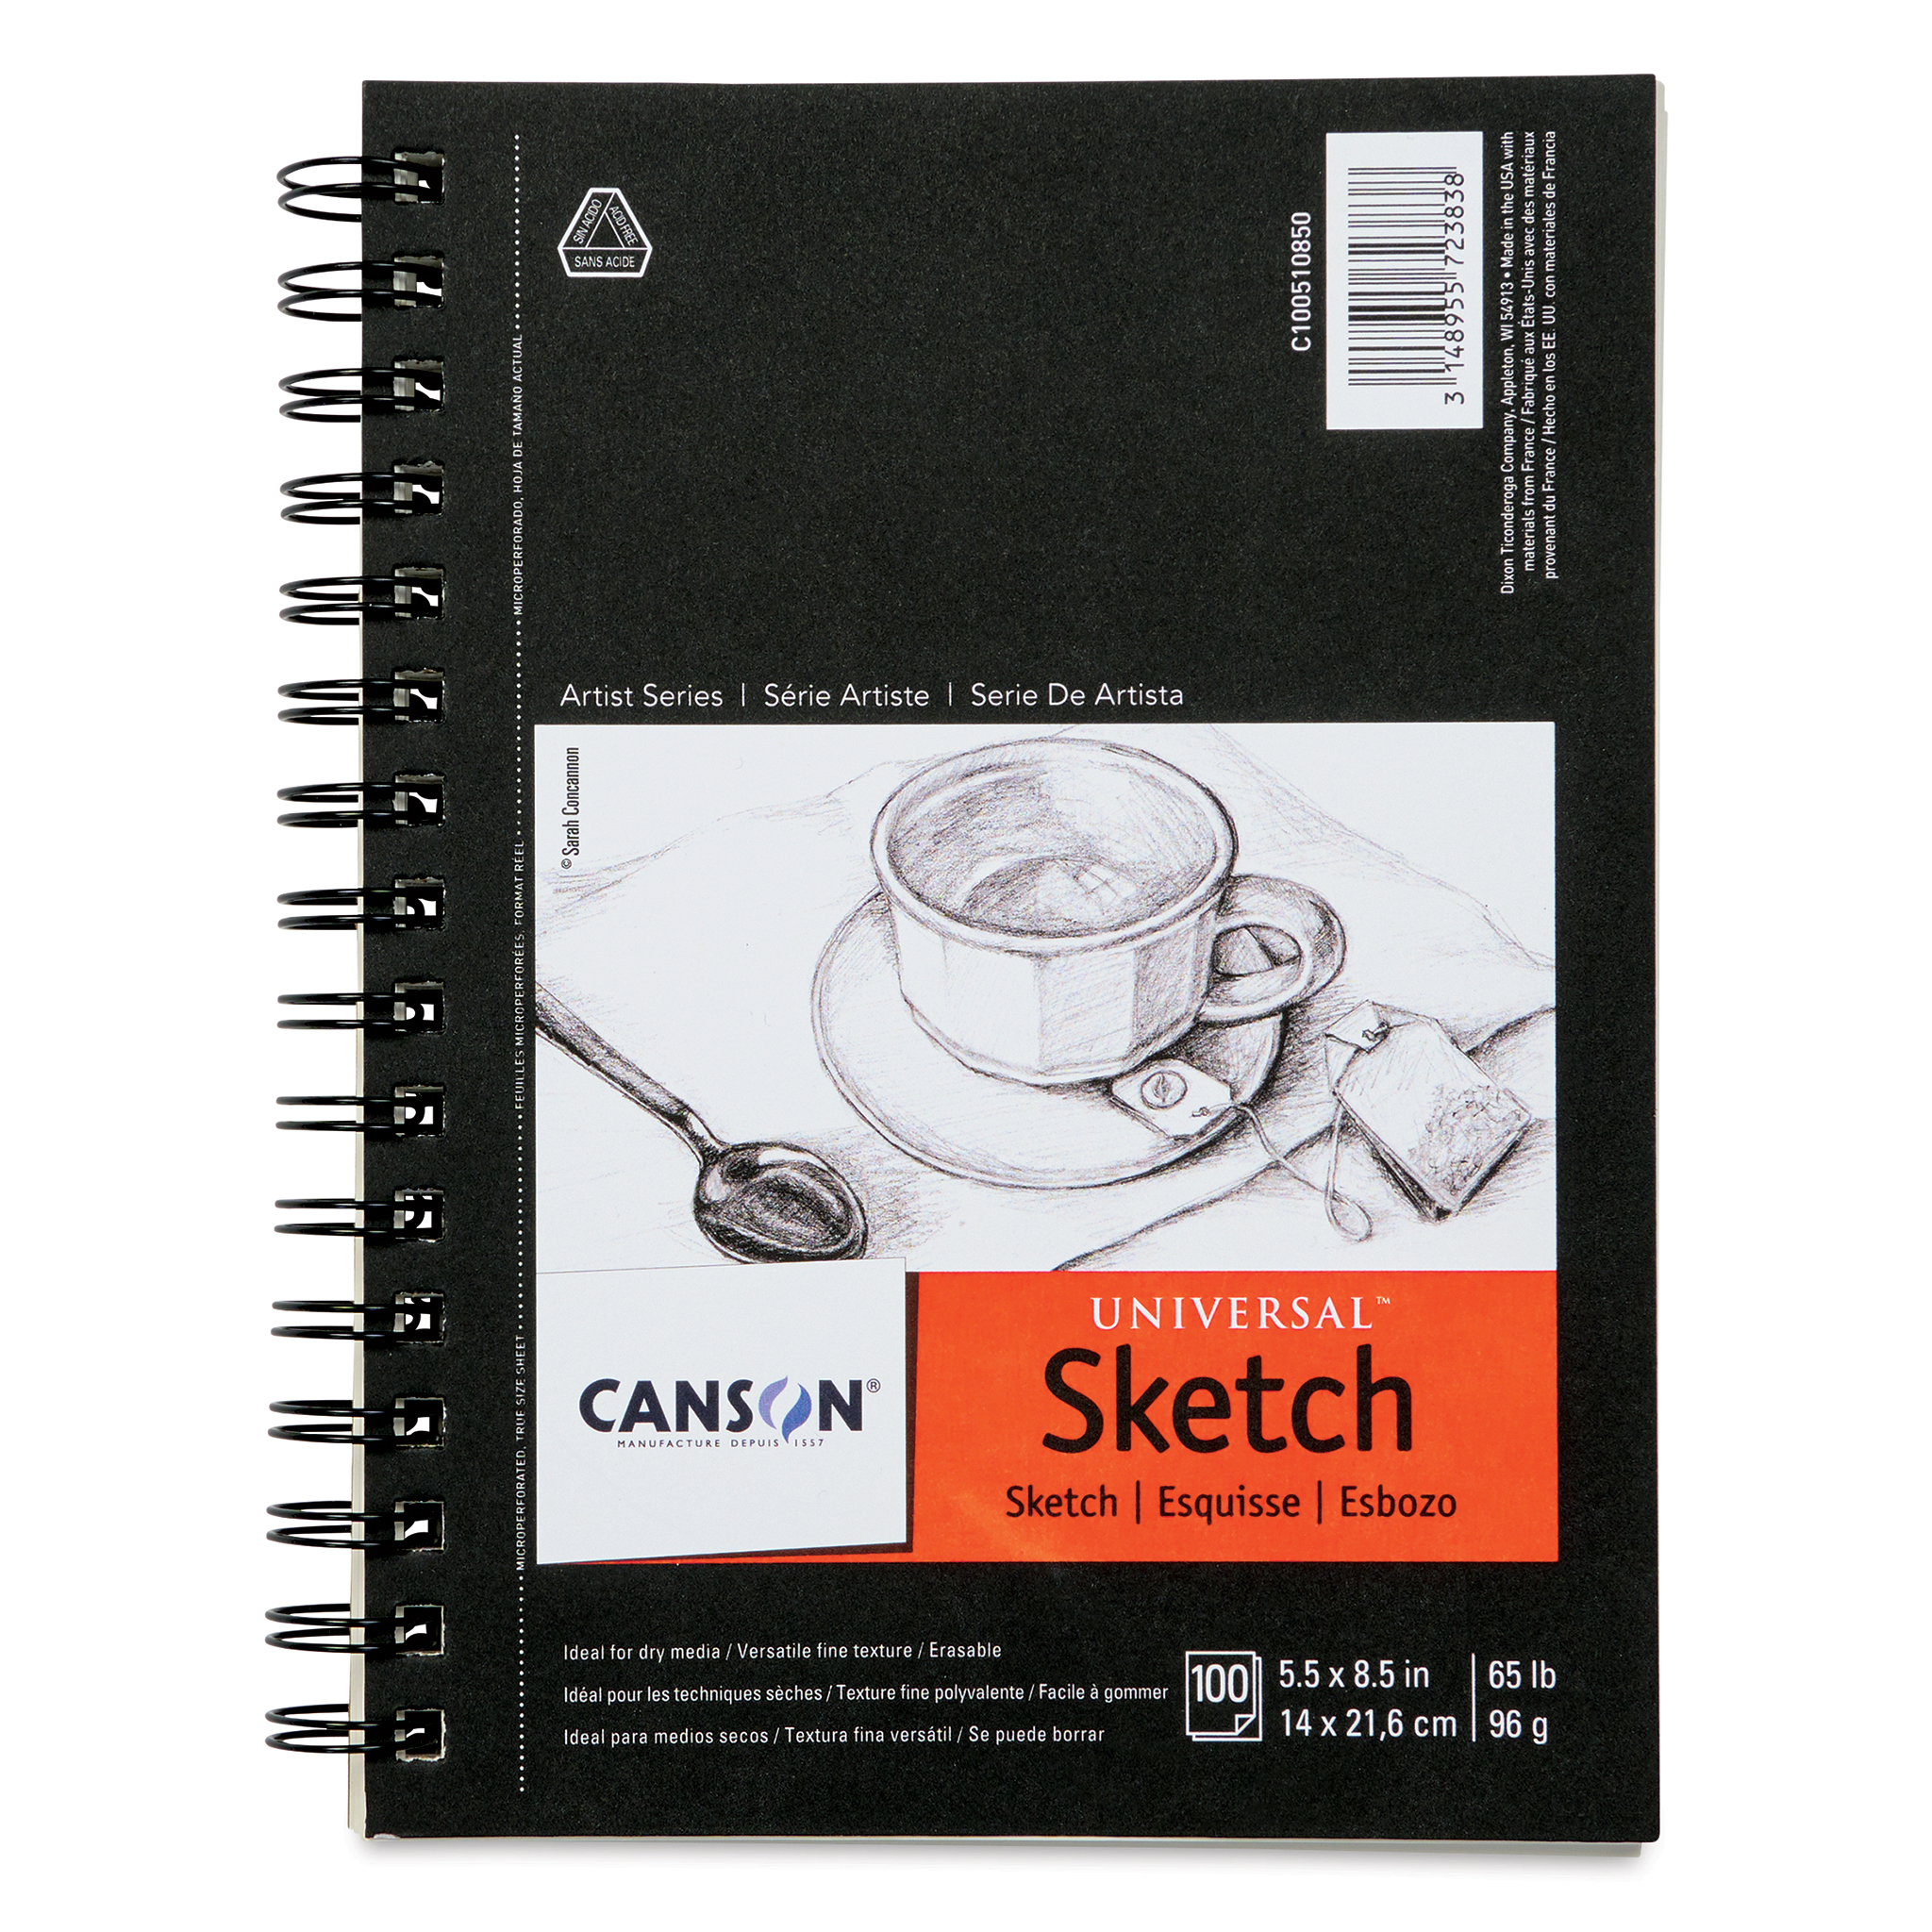 Canson Universal Sketch Paper Pad 5.5 x 8.5 ": 100 Sheets - image 1 of 2